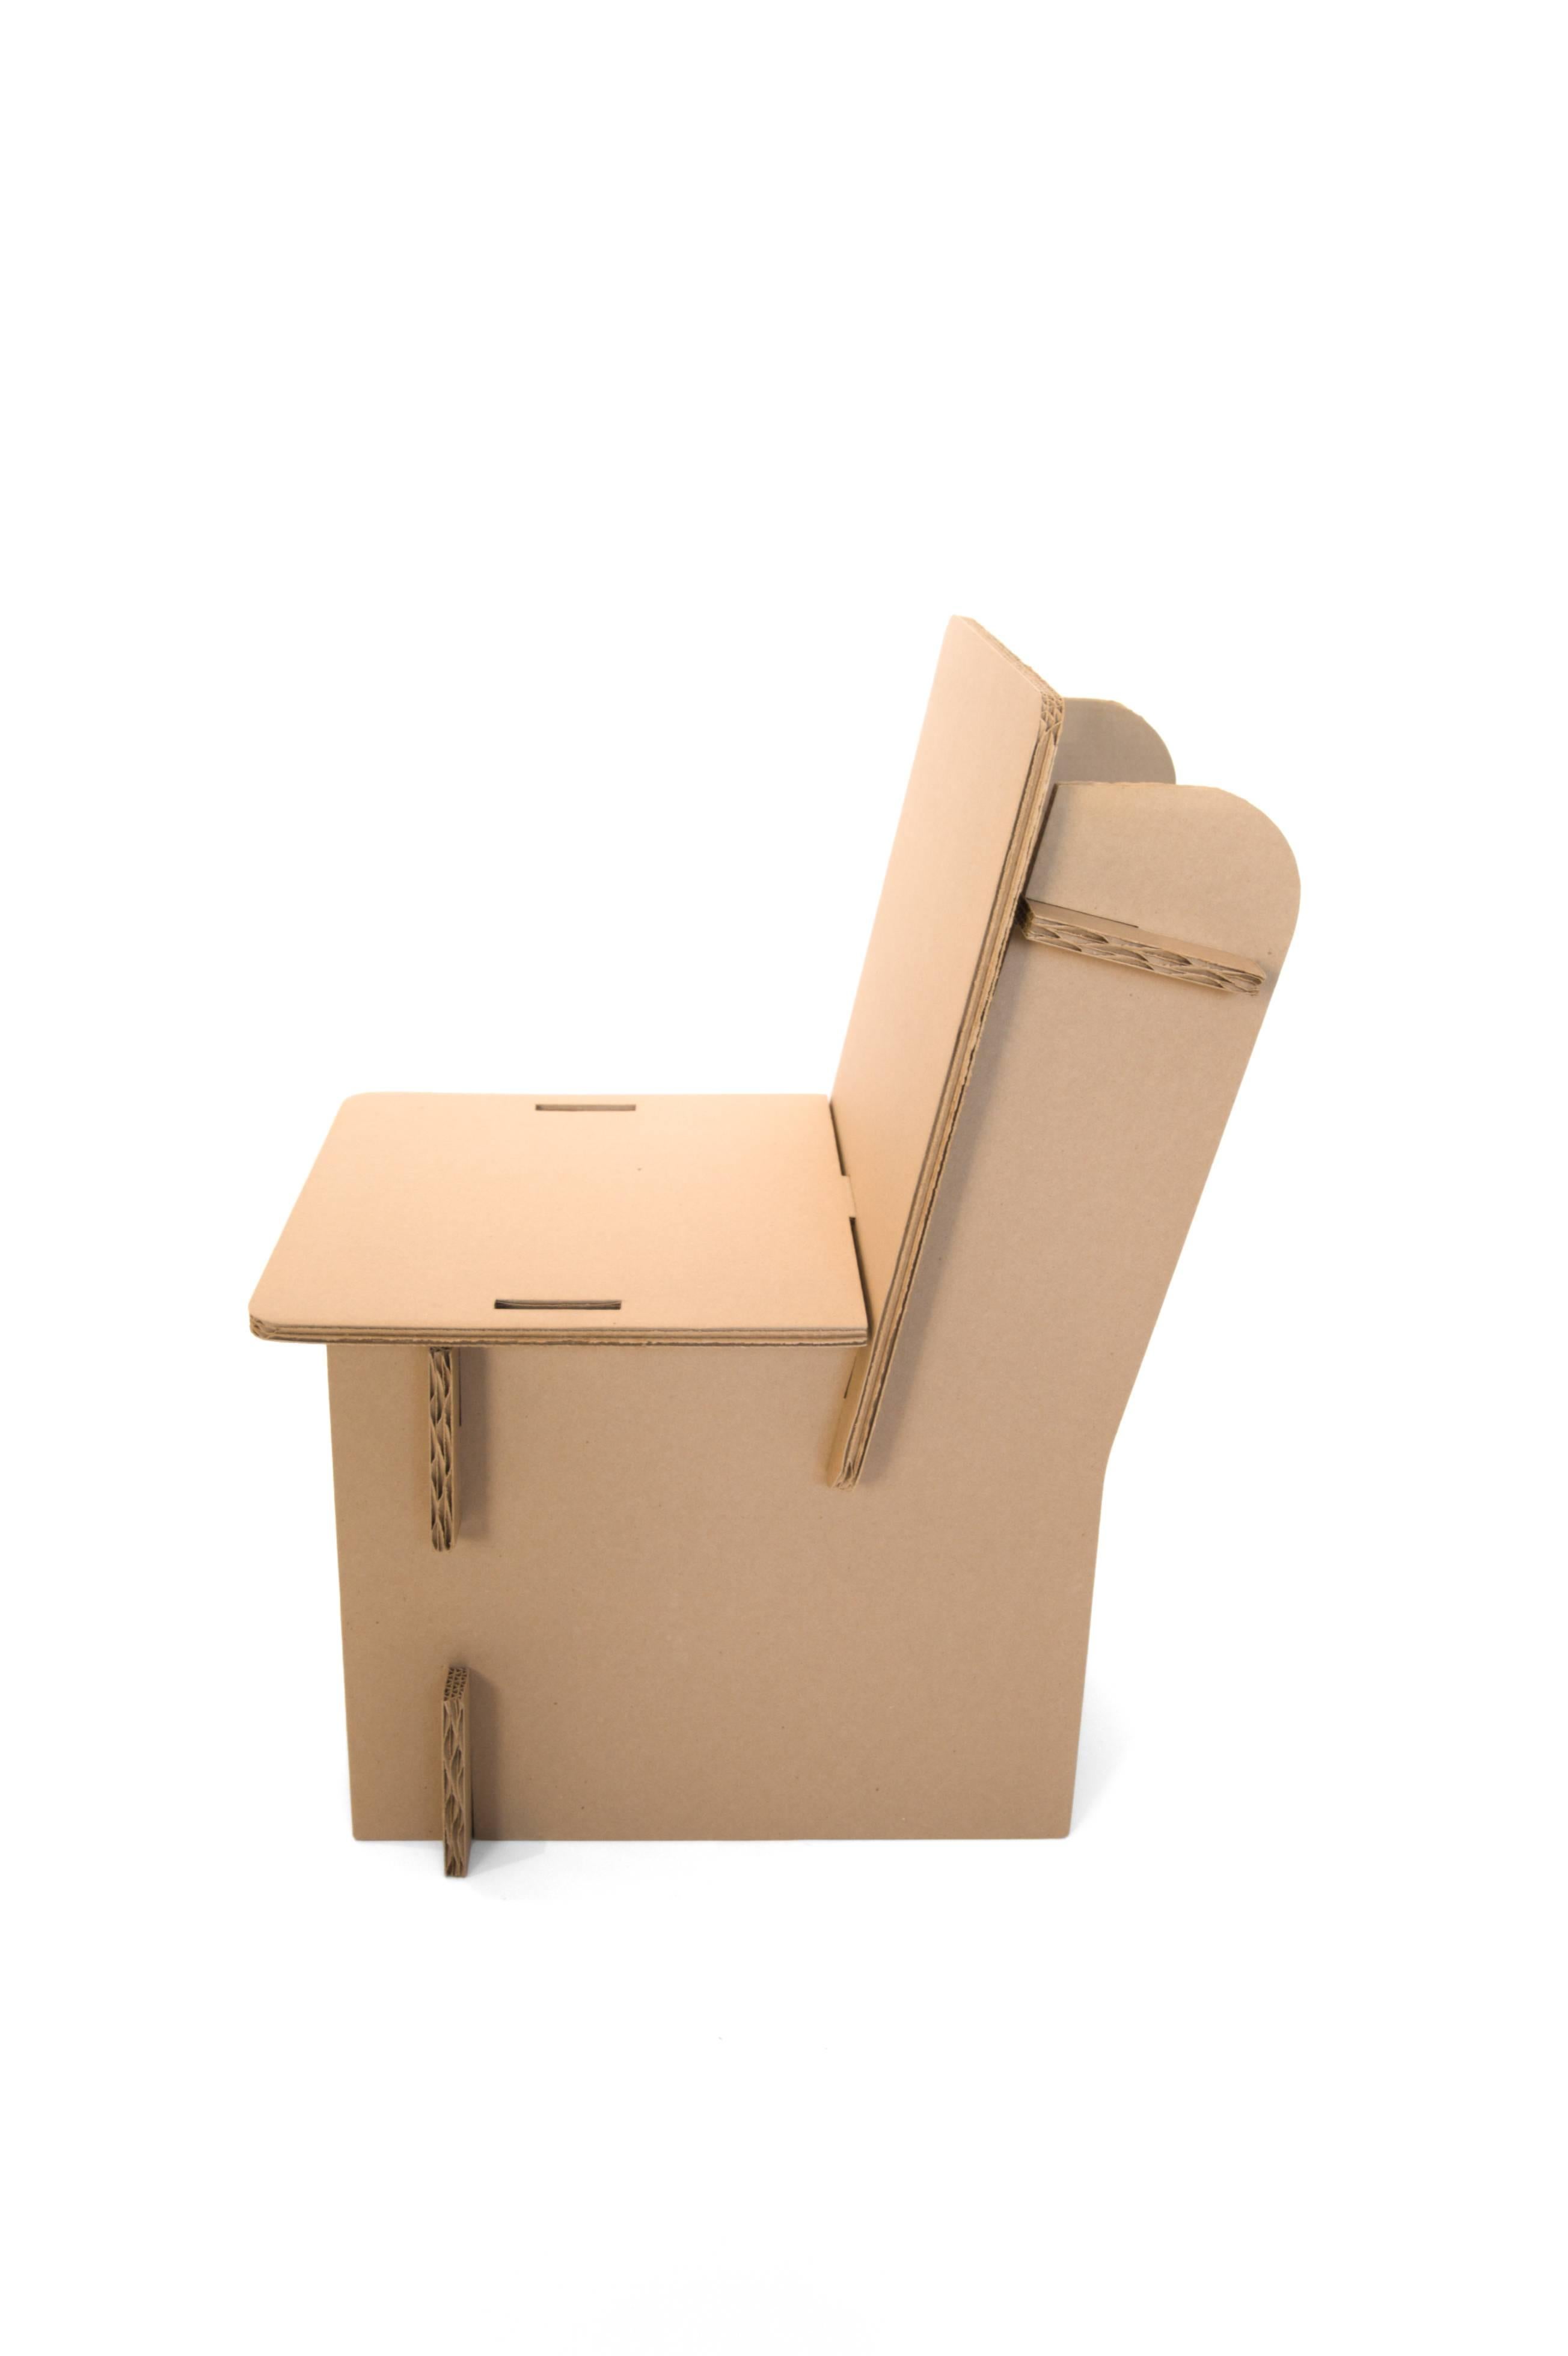 American Cardboard Chair by Mixed Nuts' Crazy Crazy for the Denver Art Museum For Sale